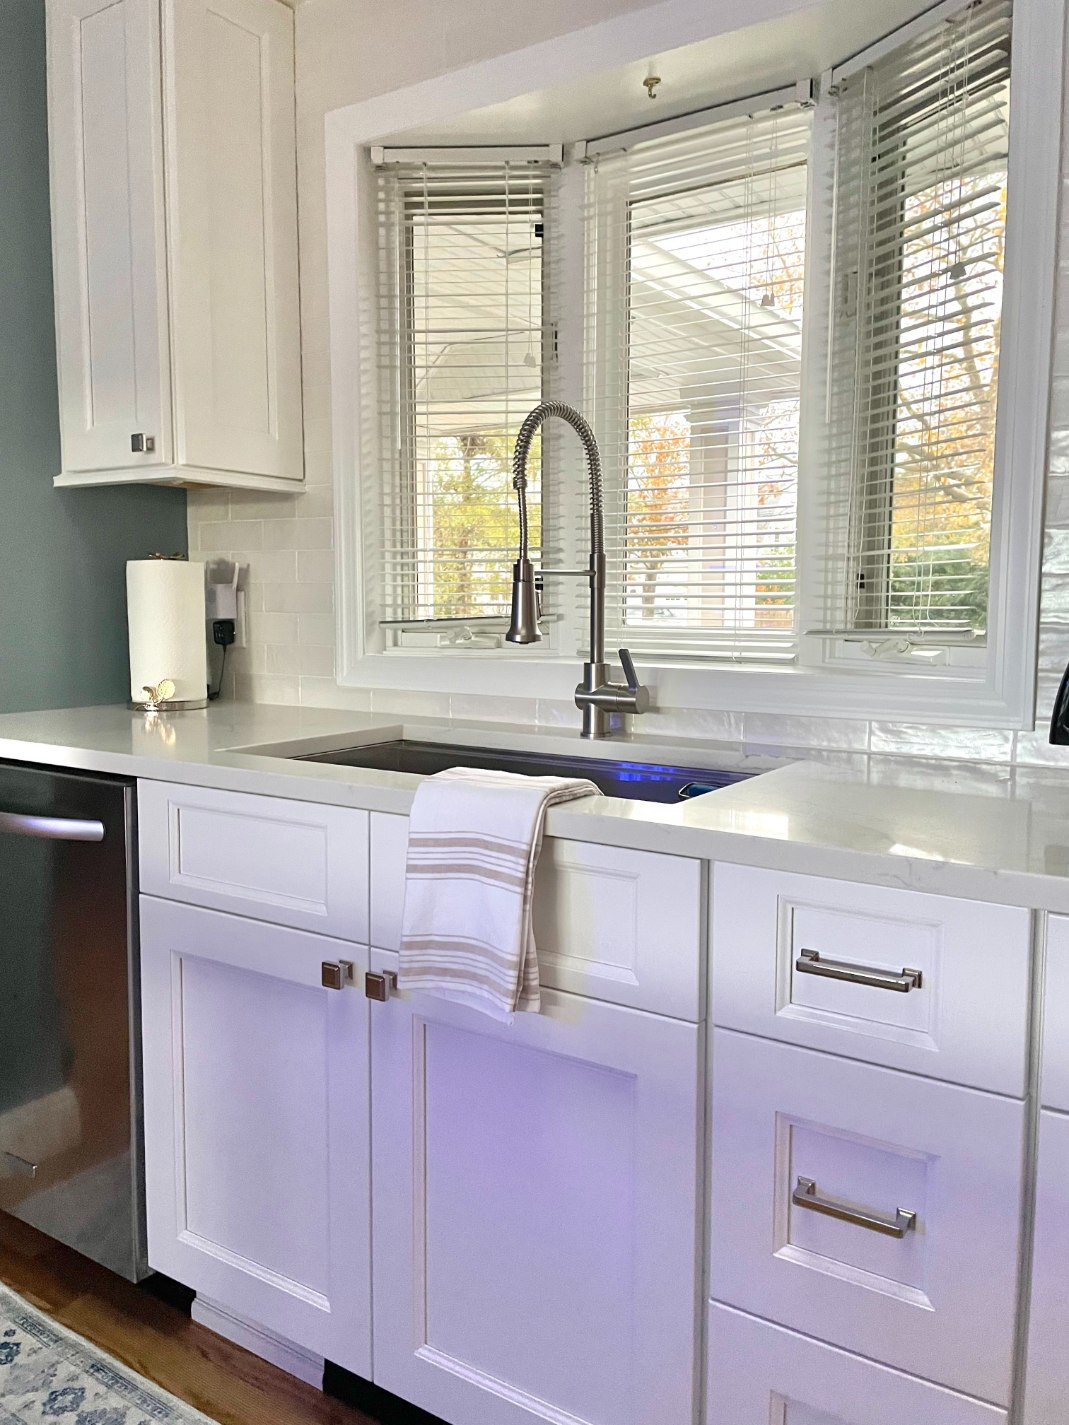 Window behind under mount sink in Islip, NY kitchen remodel by Kuhn Construction